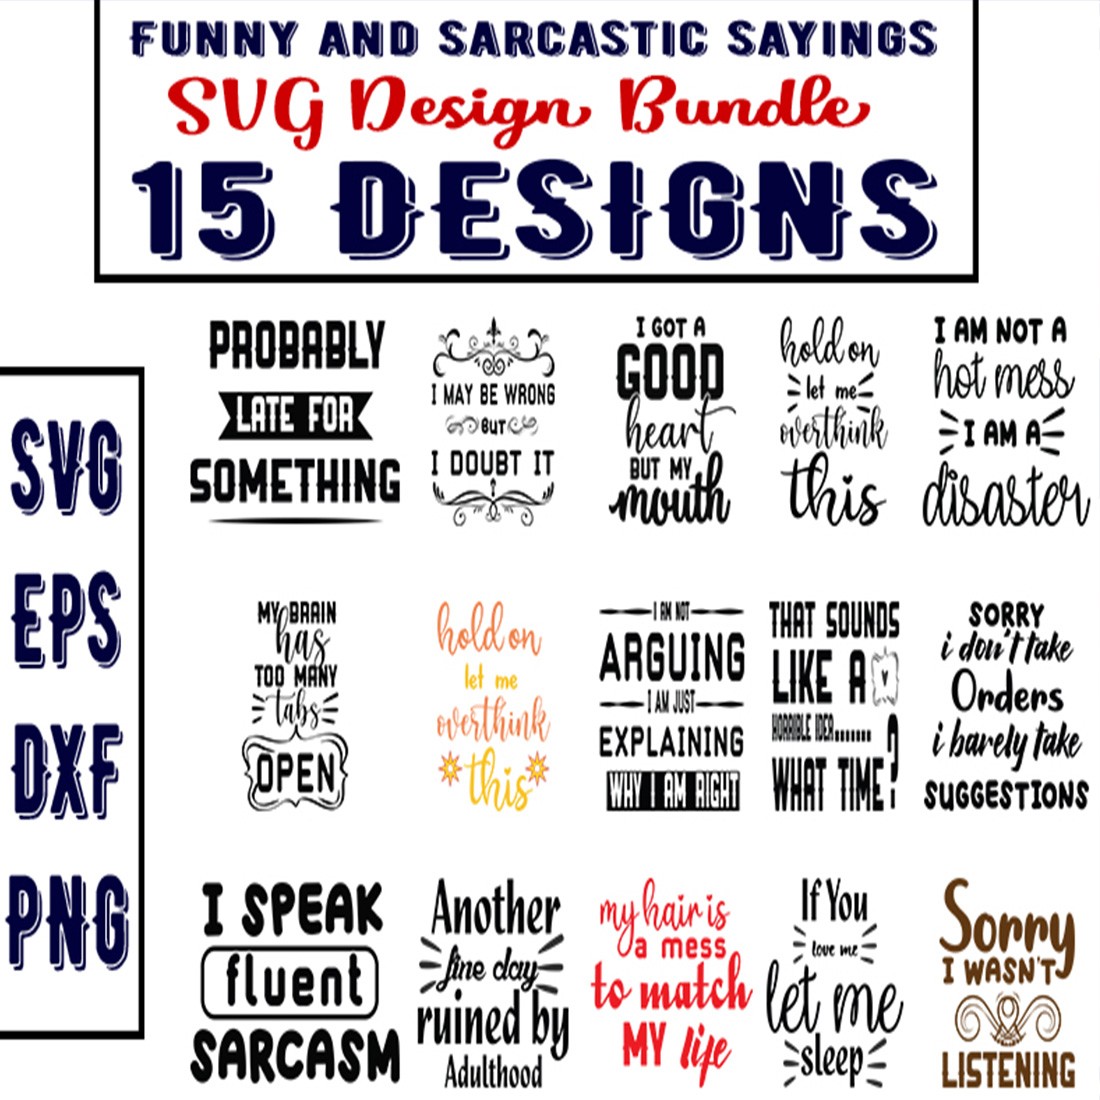 Funny and Sarcastic Sayings Bundle cover image.